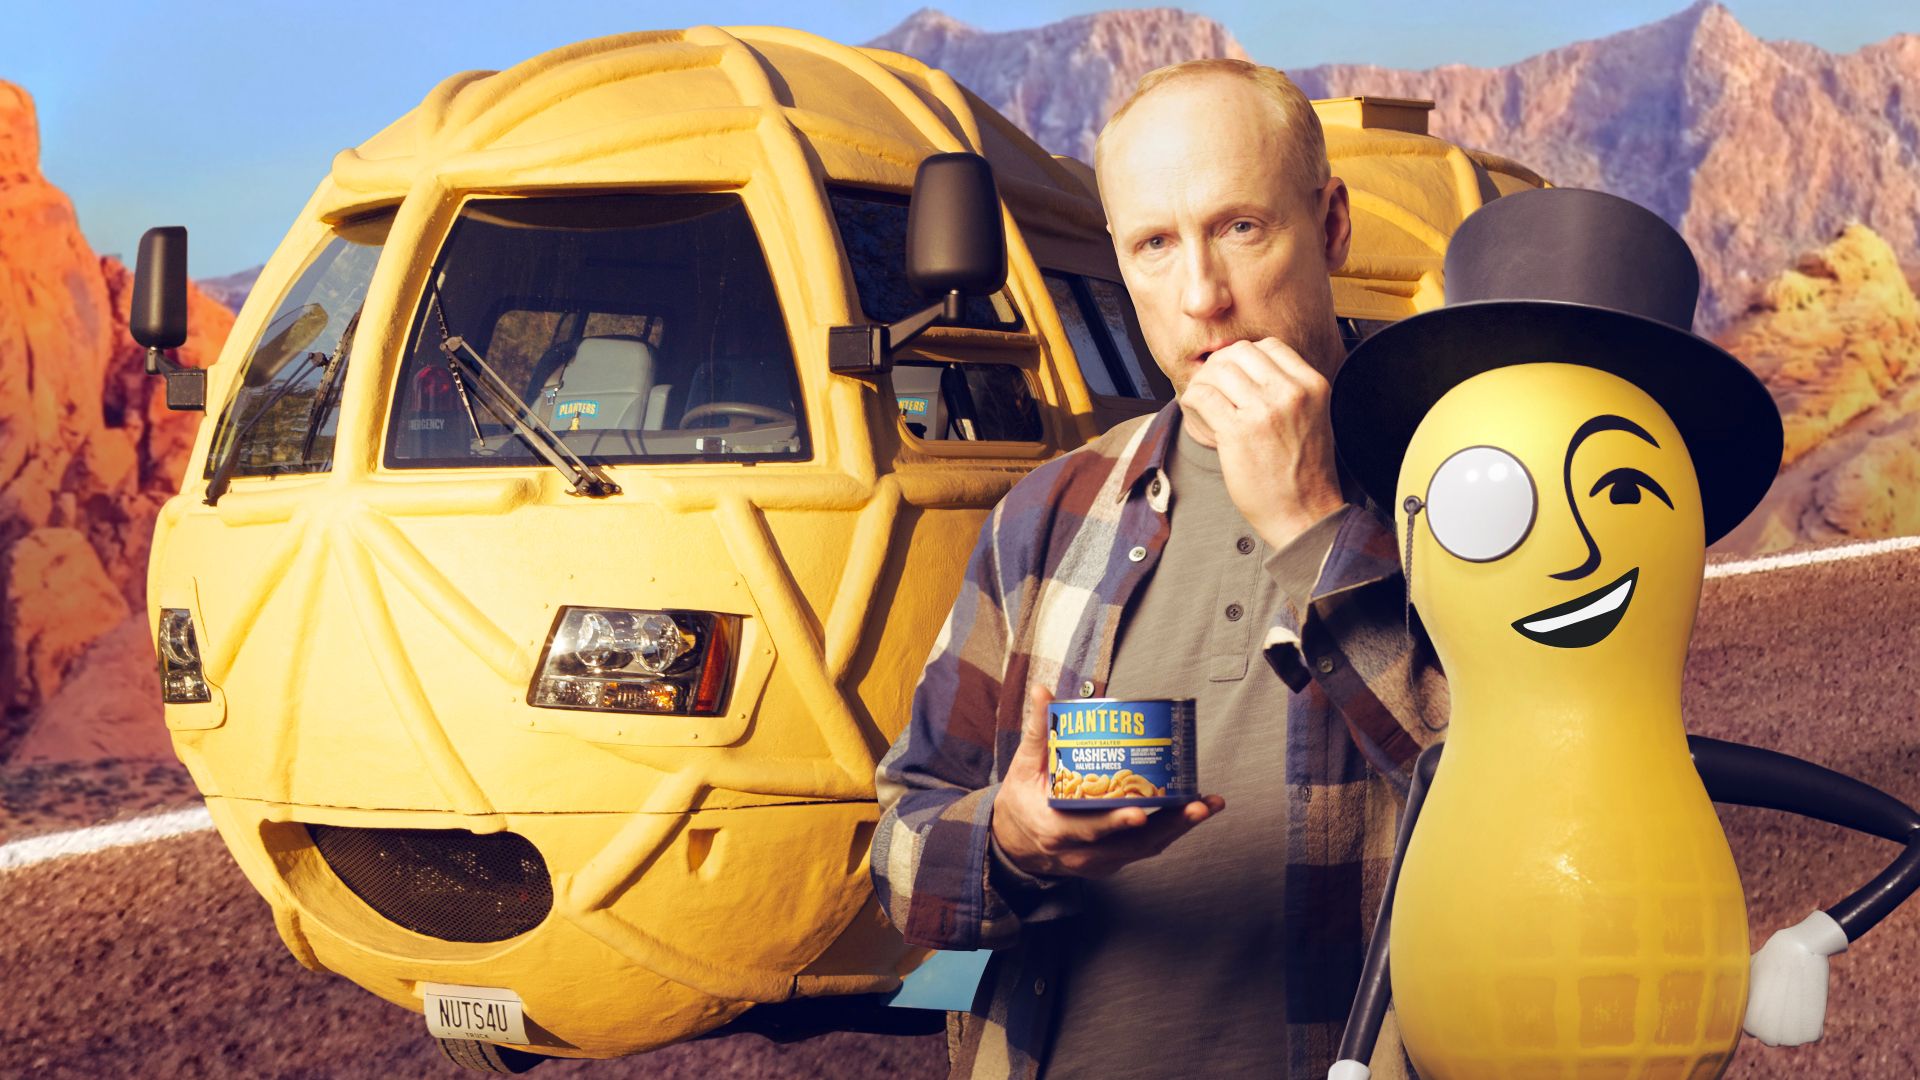 What happened to Yellow? M&M'S delights viewers with 'nutty' Super Bowl ad, 2014-02-13